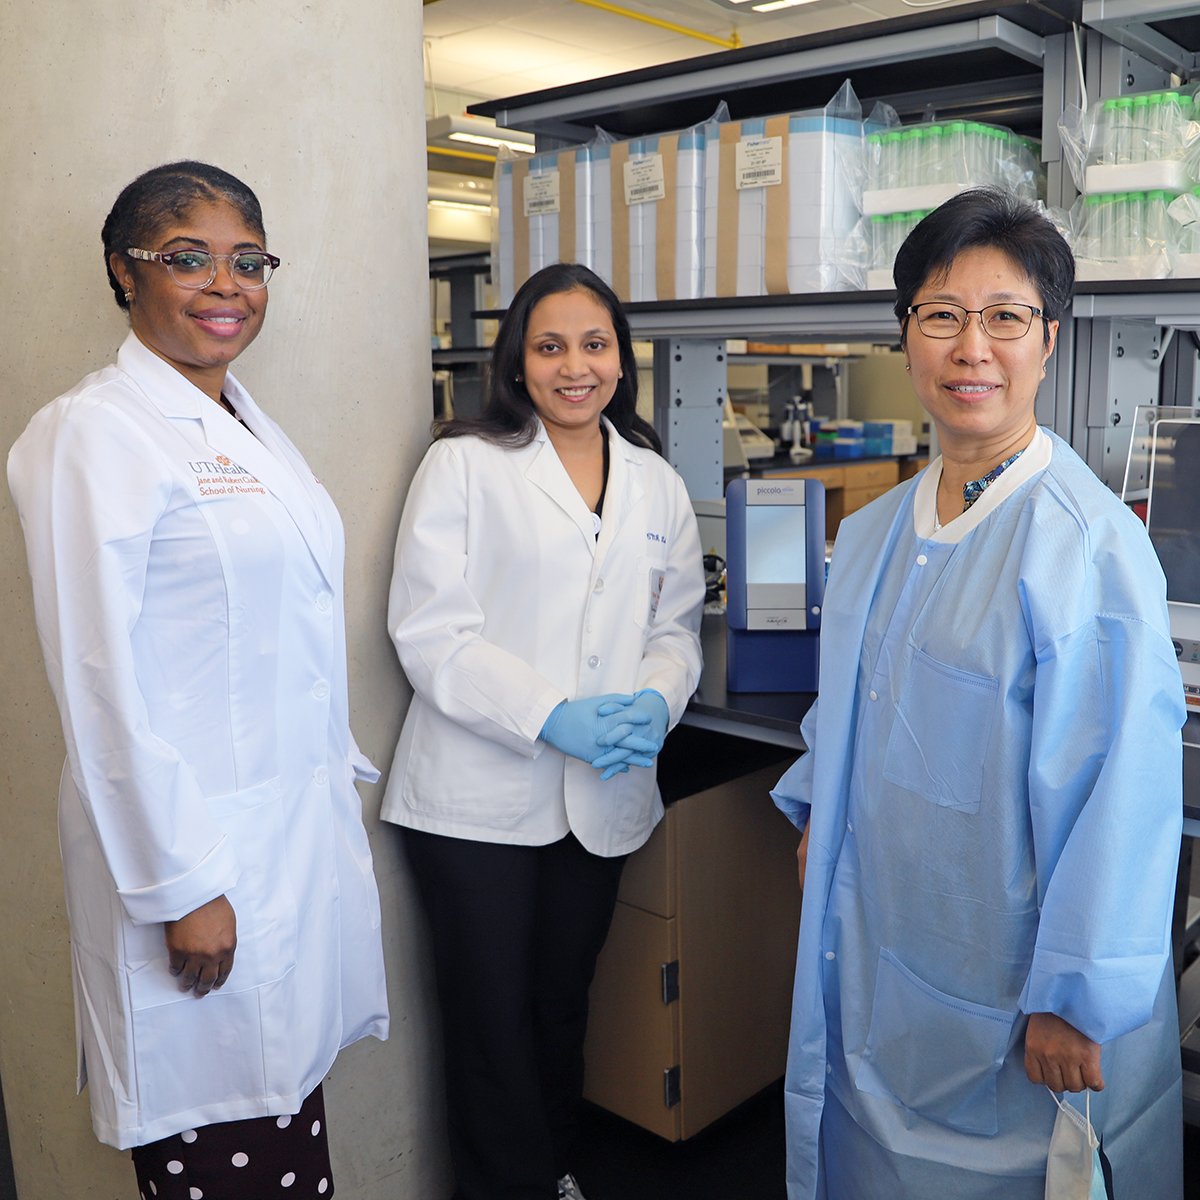 Pictured (L-R): Director of Research Services Charmaine Wilson, Senior Research Associate Sharvari Kamat, and Hongyu Wang, Hongyu Wang, MD, PhD, the CNR Lab’s interim director.